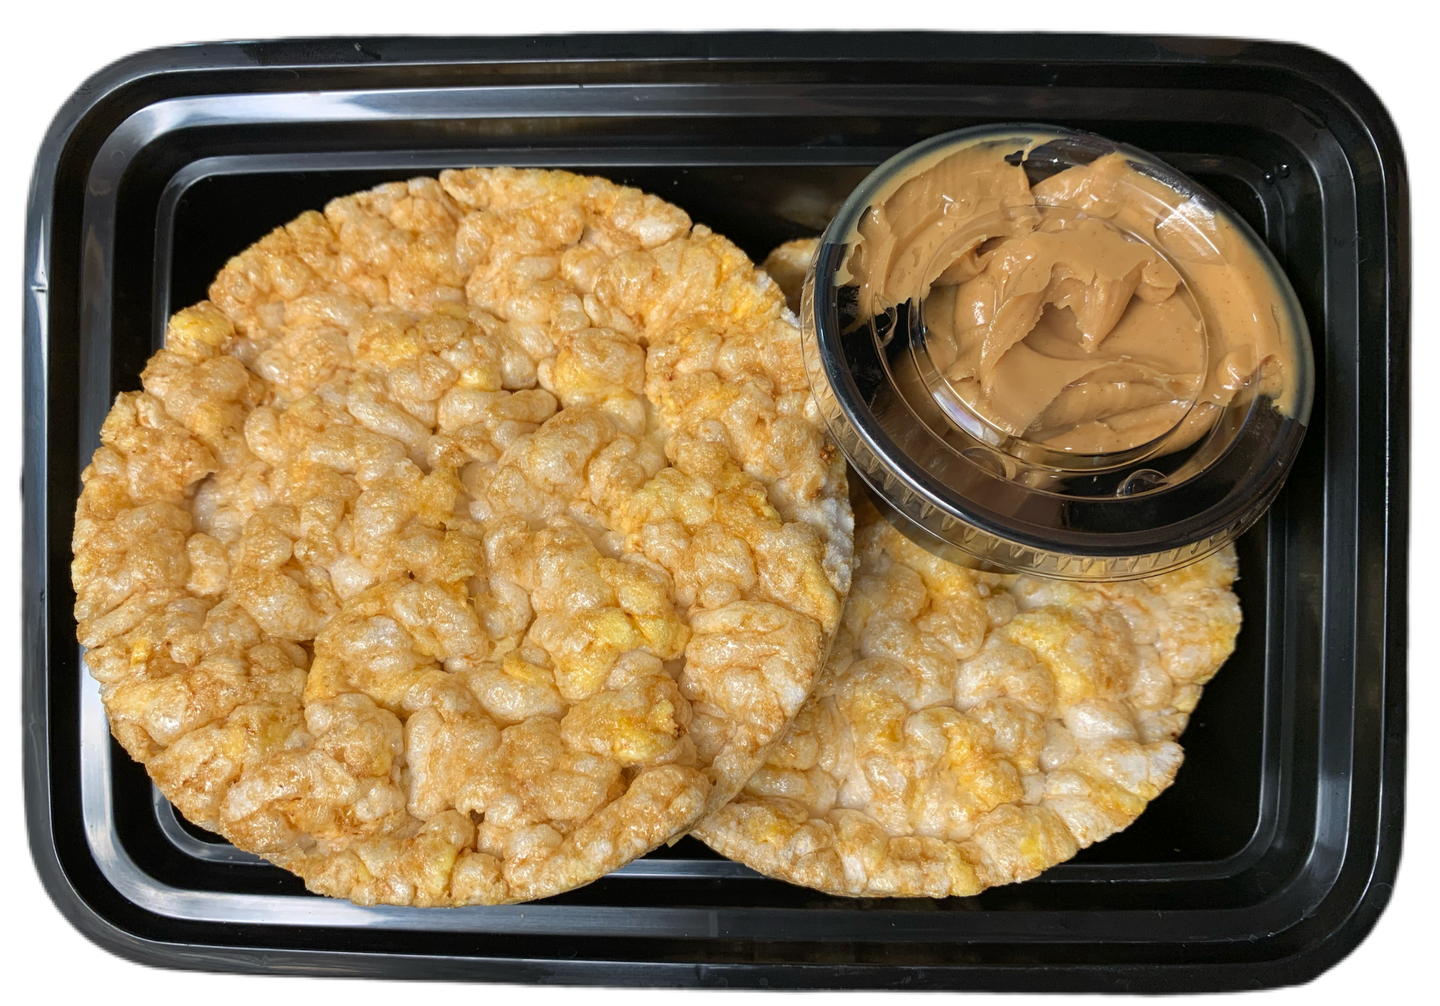 Caramel Rice Cakes and Peanut butter (GF)